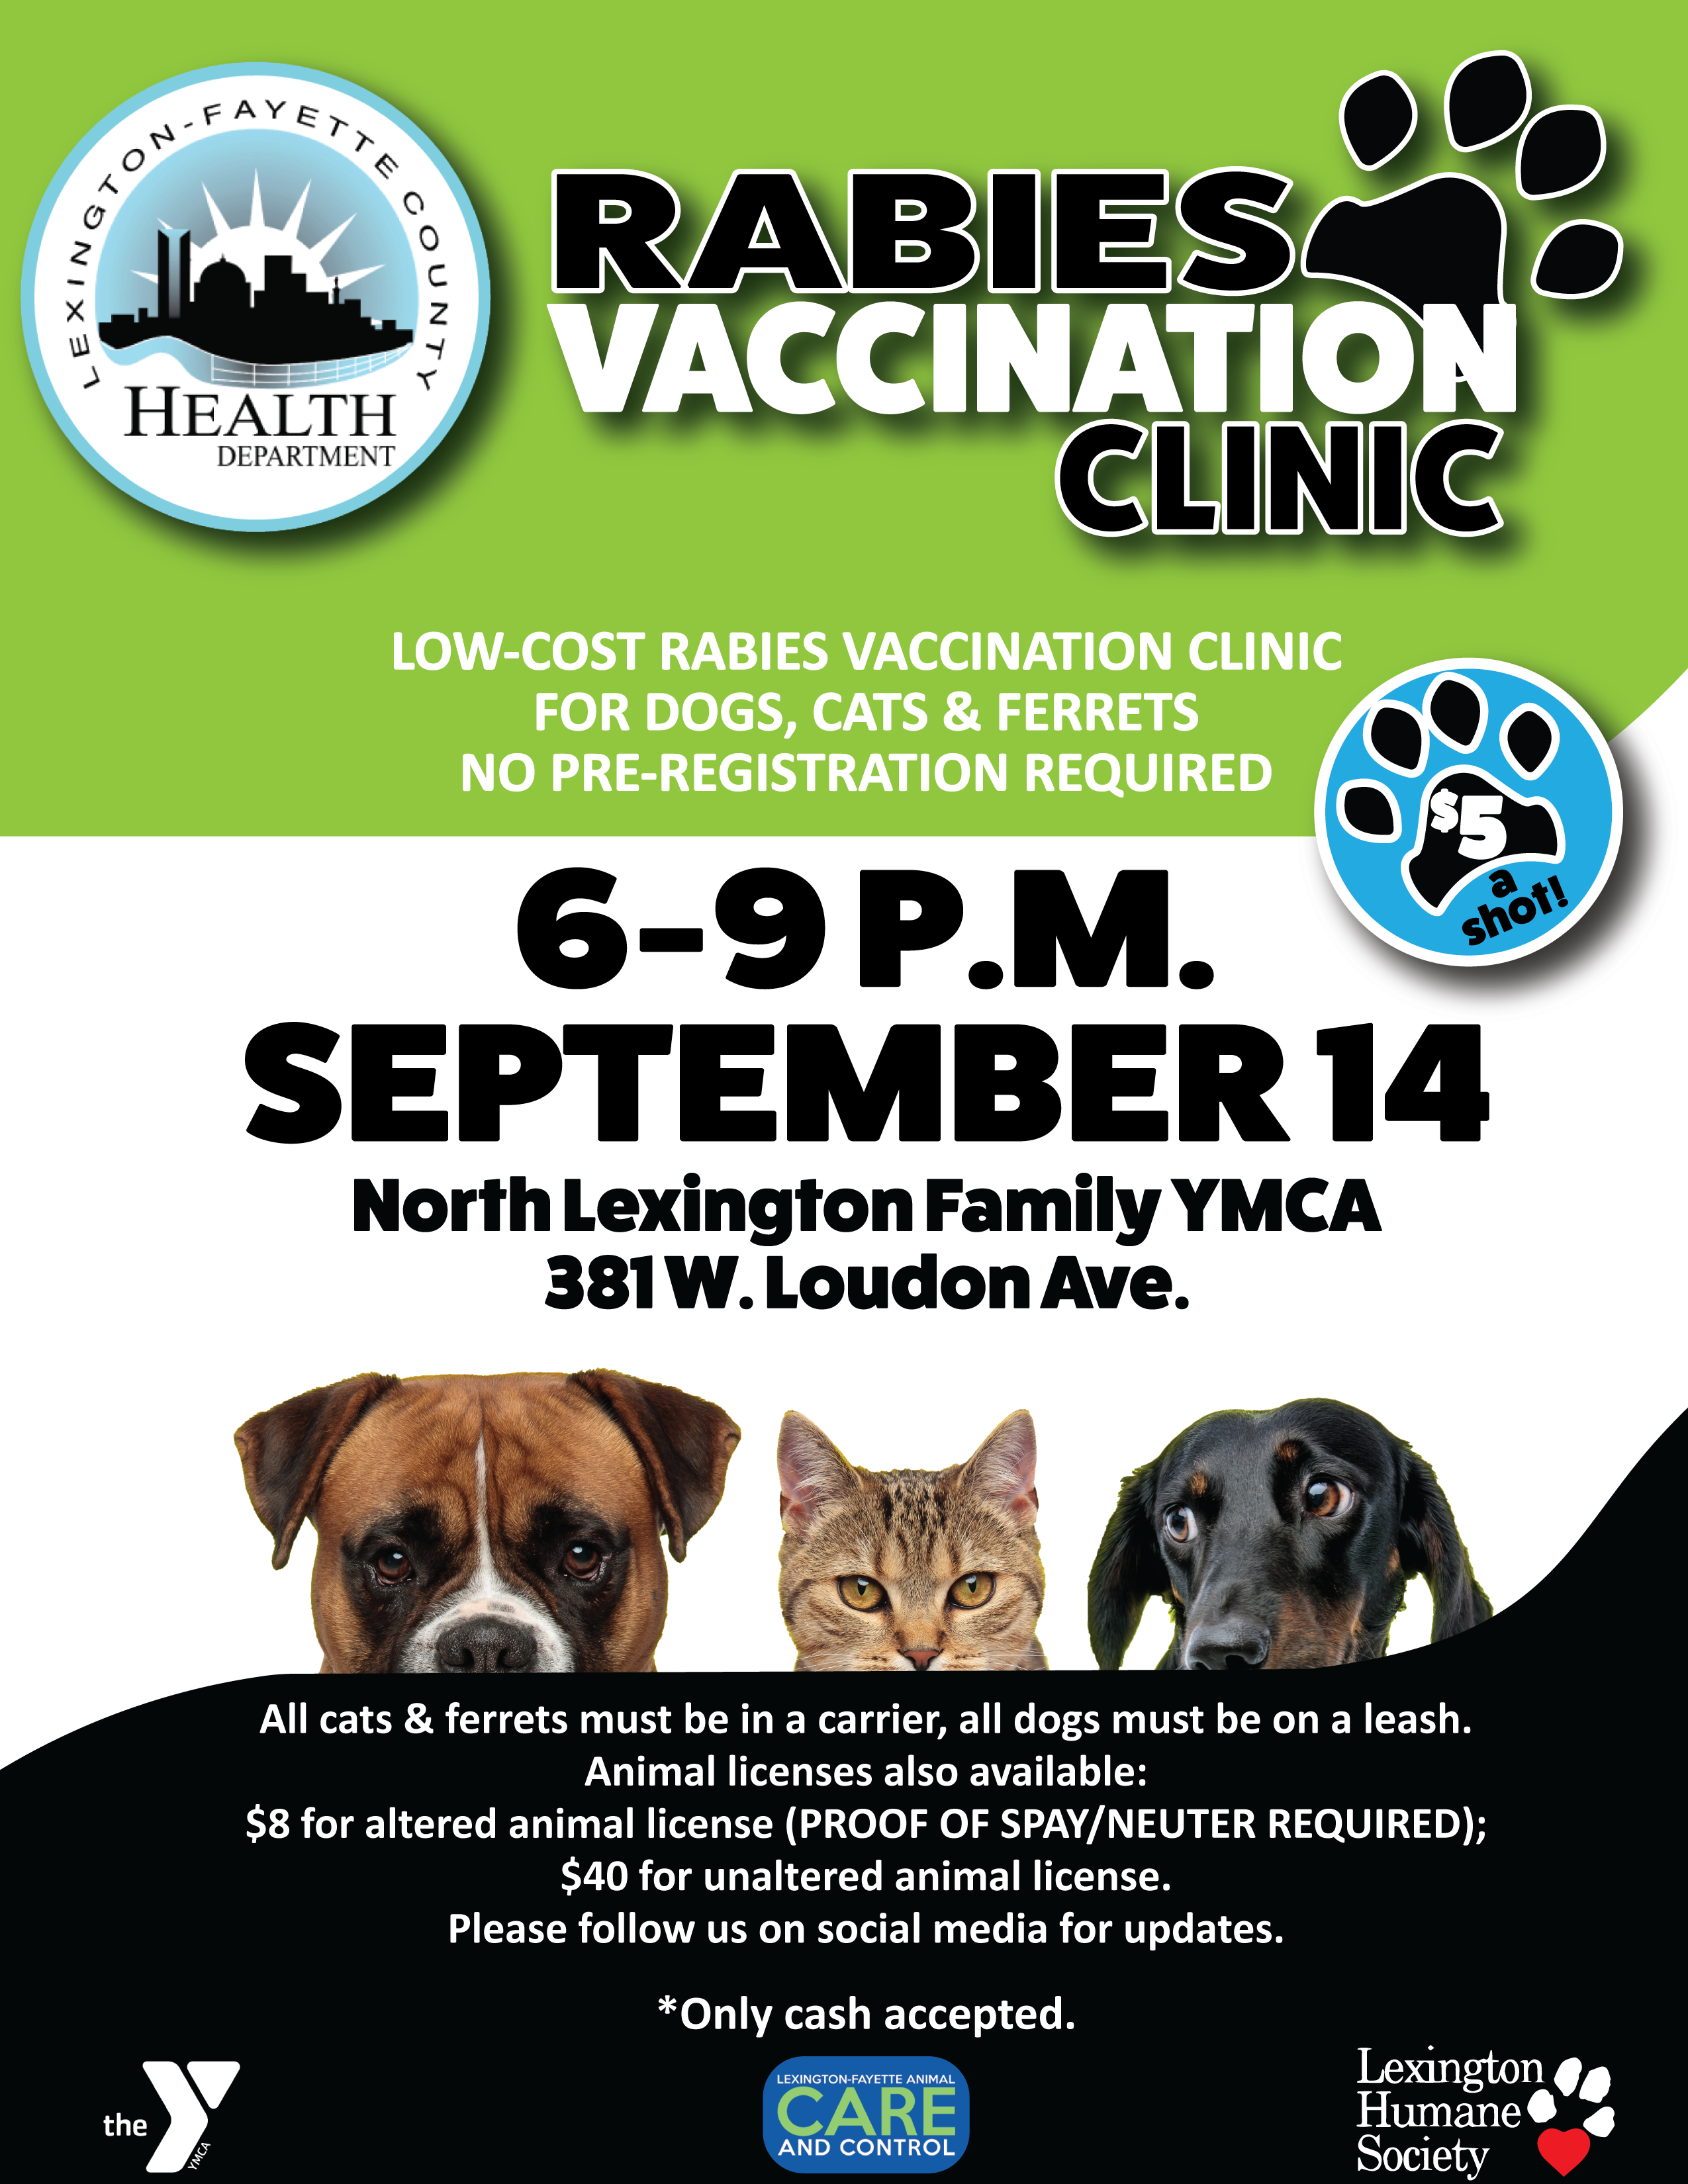 LFCHD to hold low-cost rabies vaccination clinic